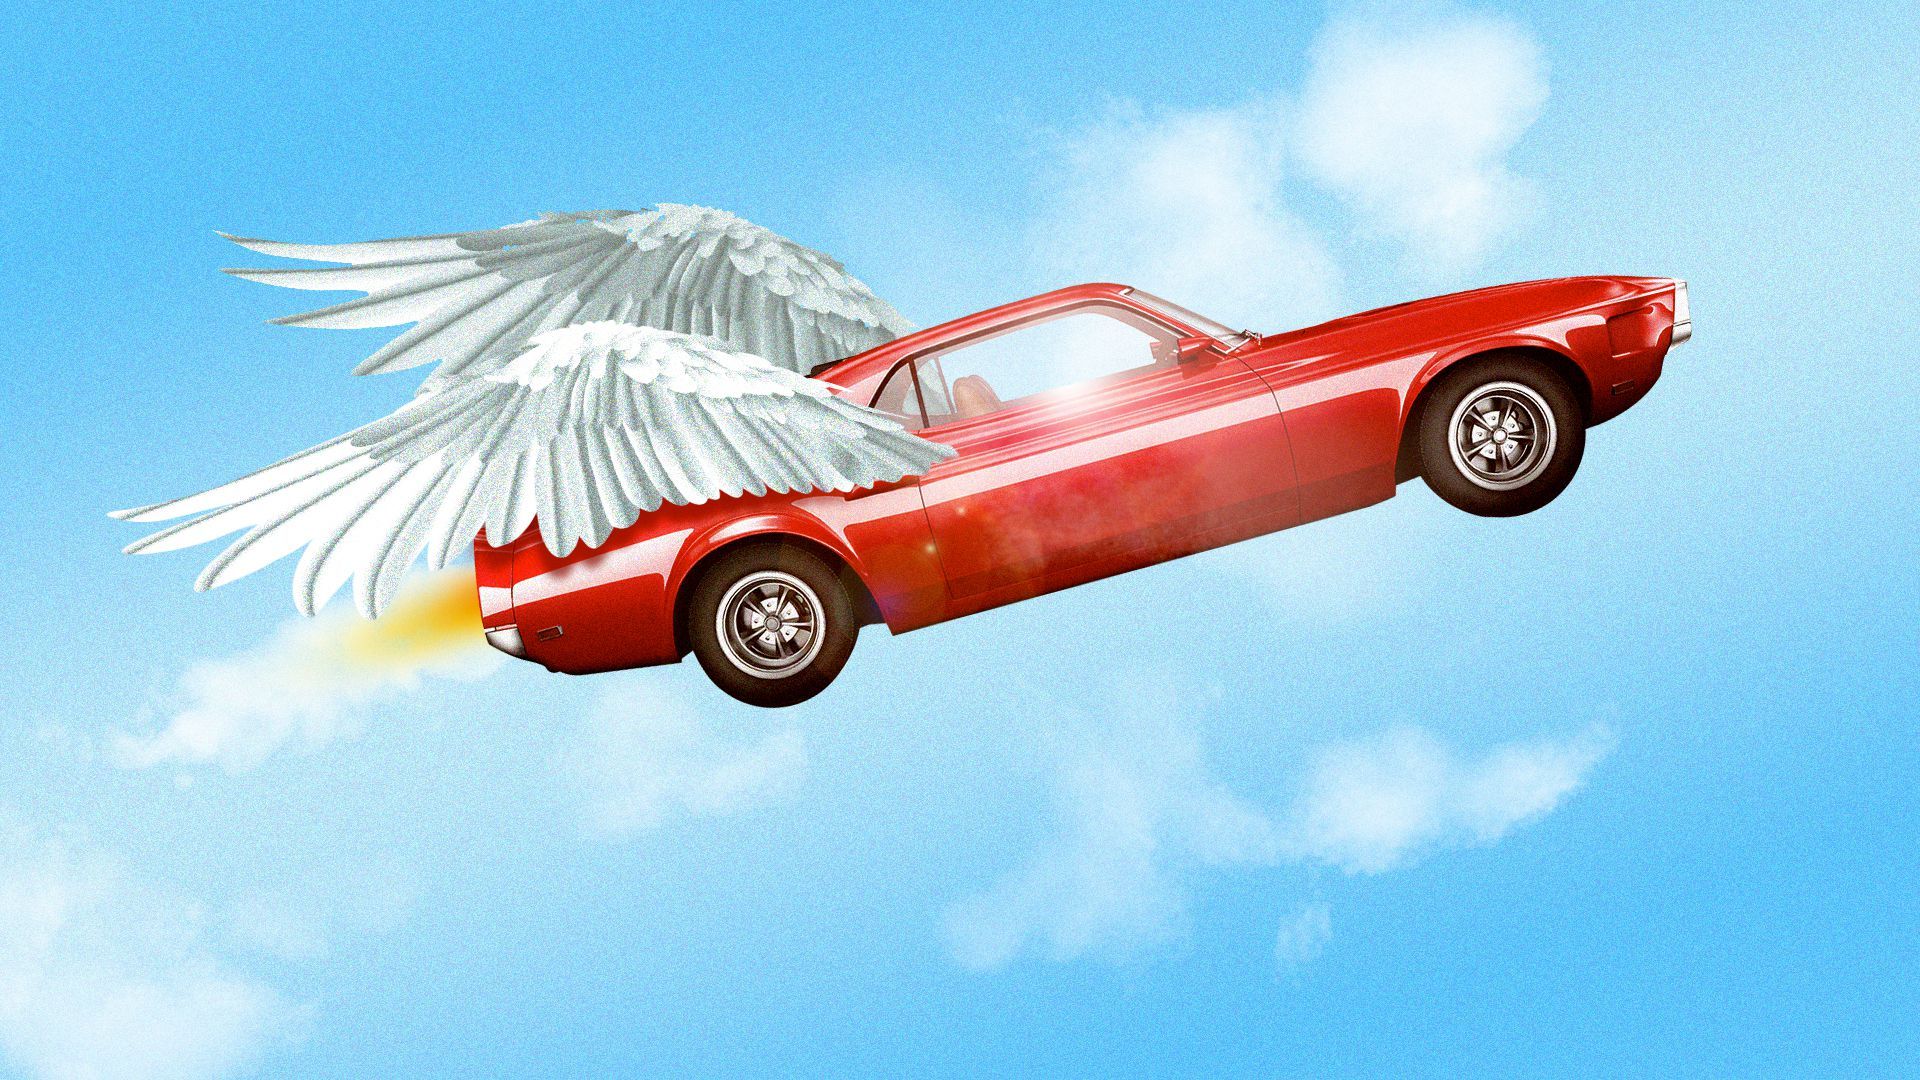 Illustration of a car with wings flying through the sky.